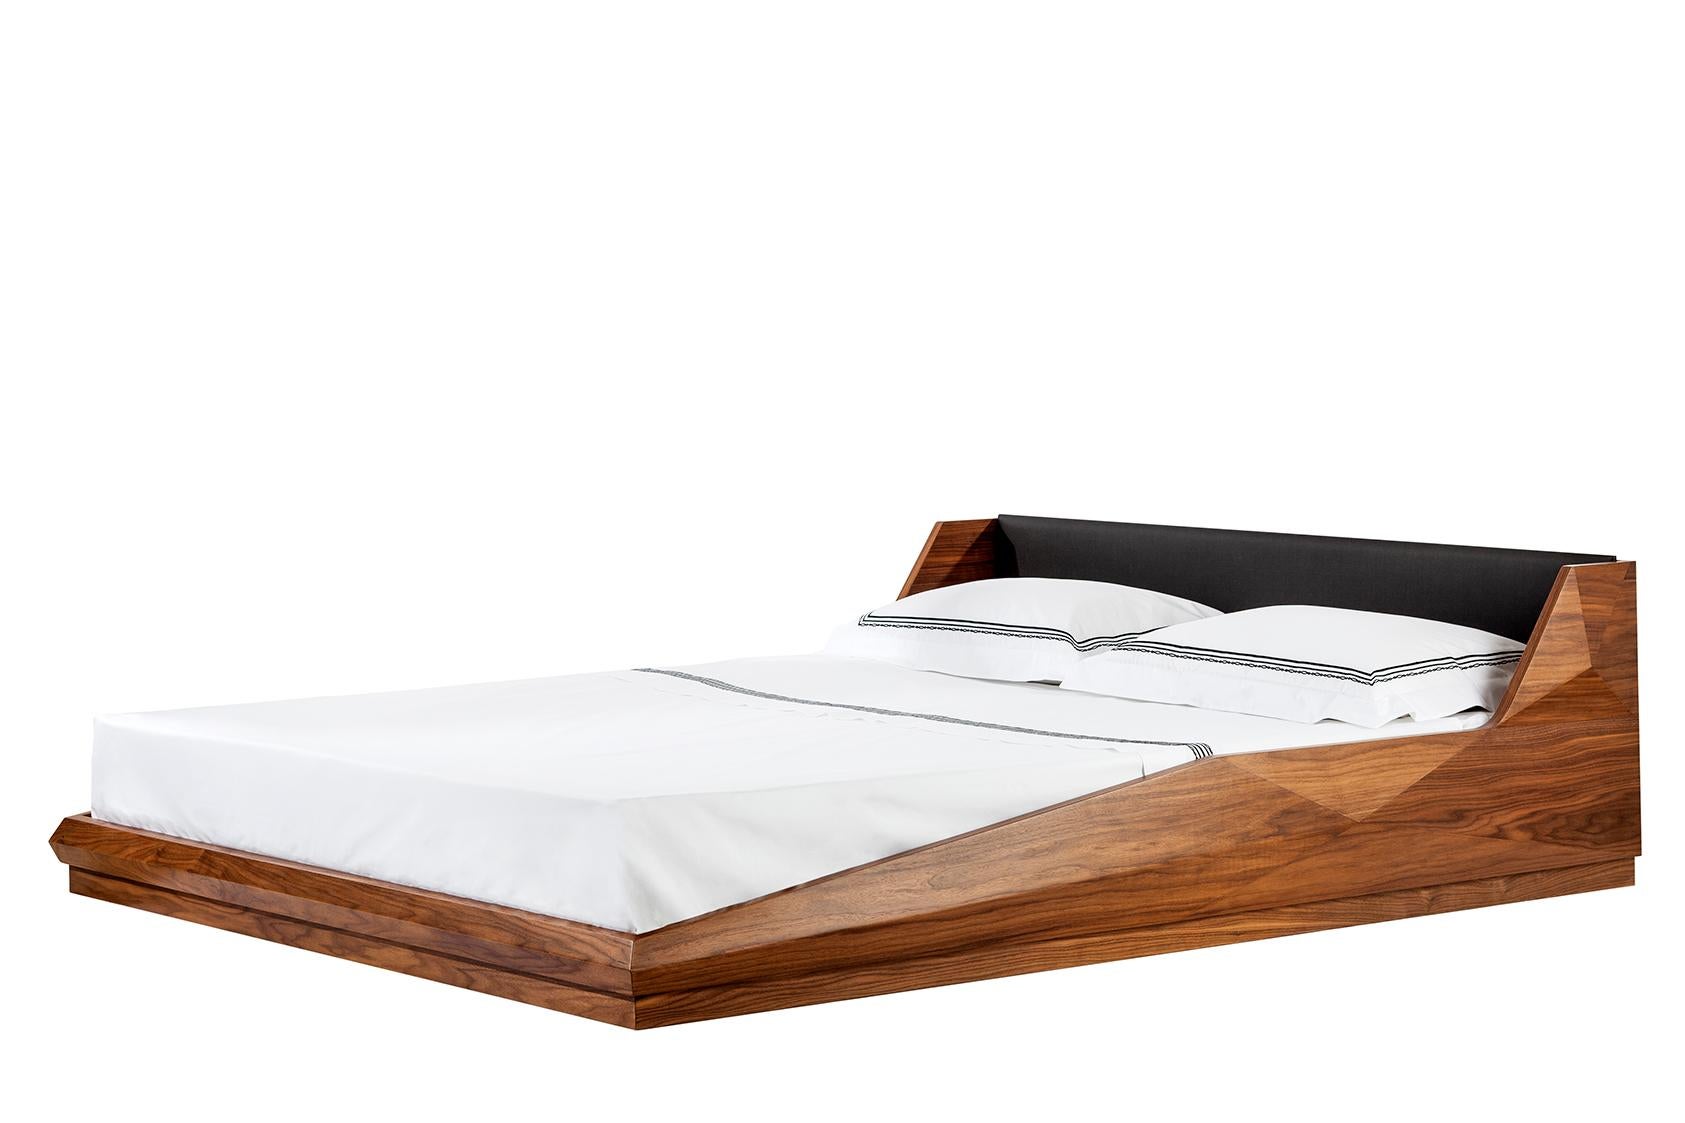 Kontra’s interpretation of the bed.
Convex geometric-shaped walnut/oak body and leather detailed upholstery.

